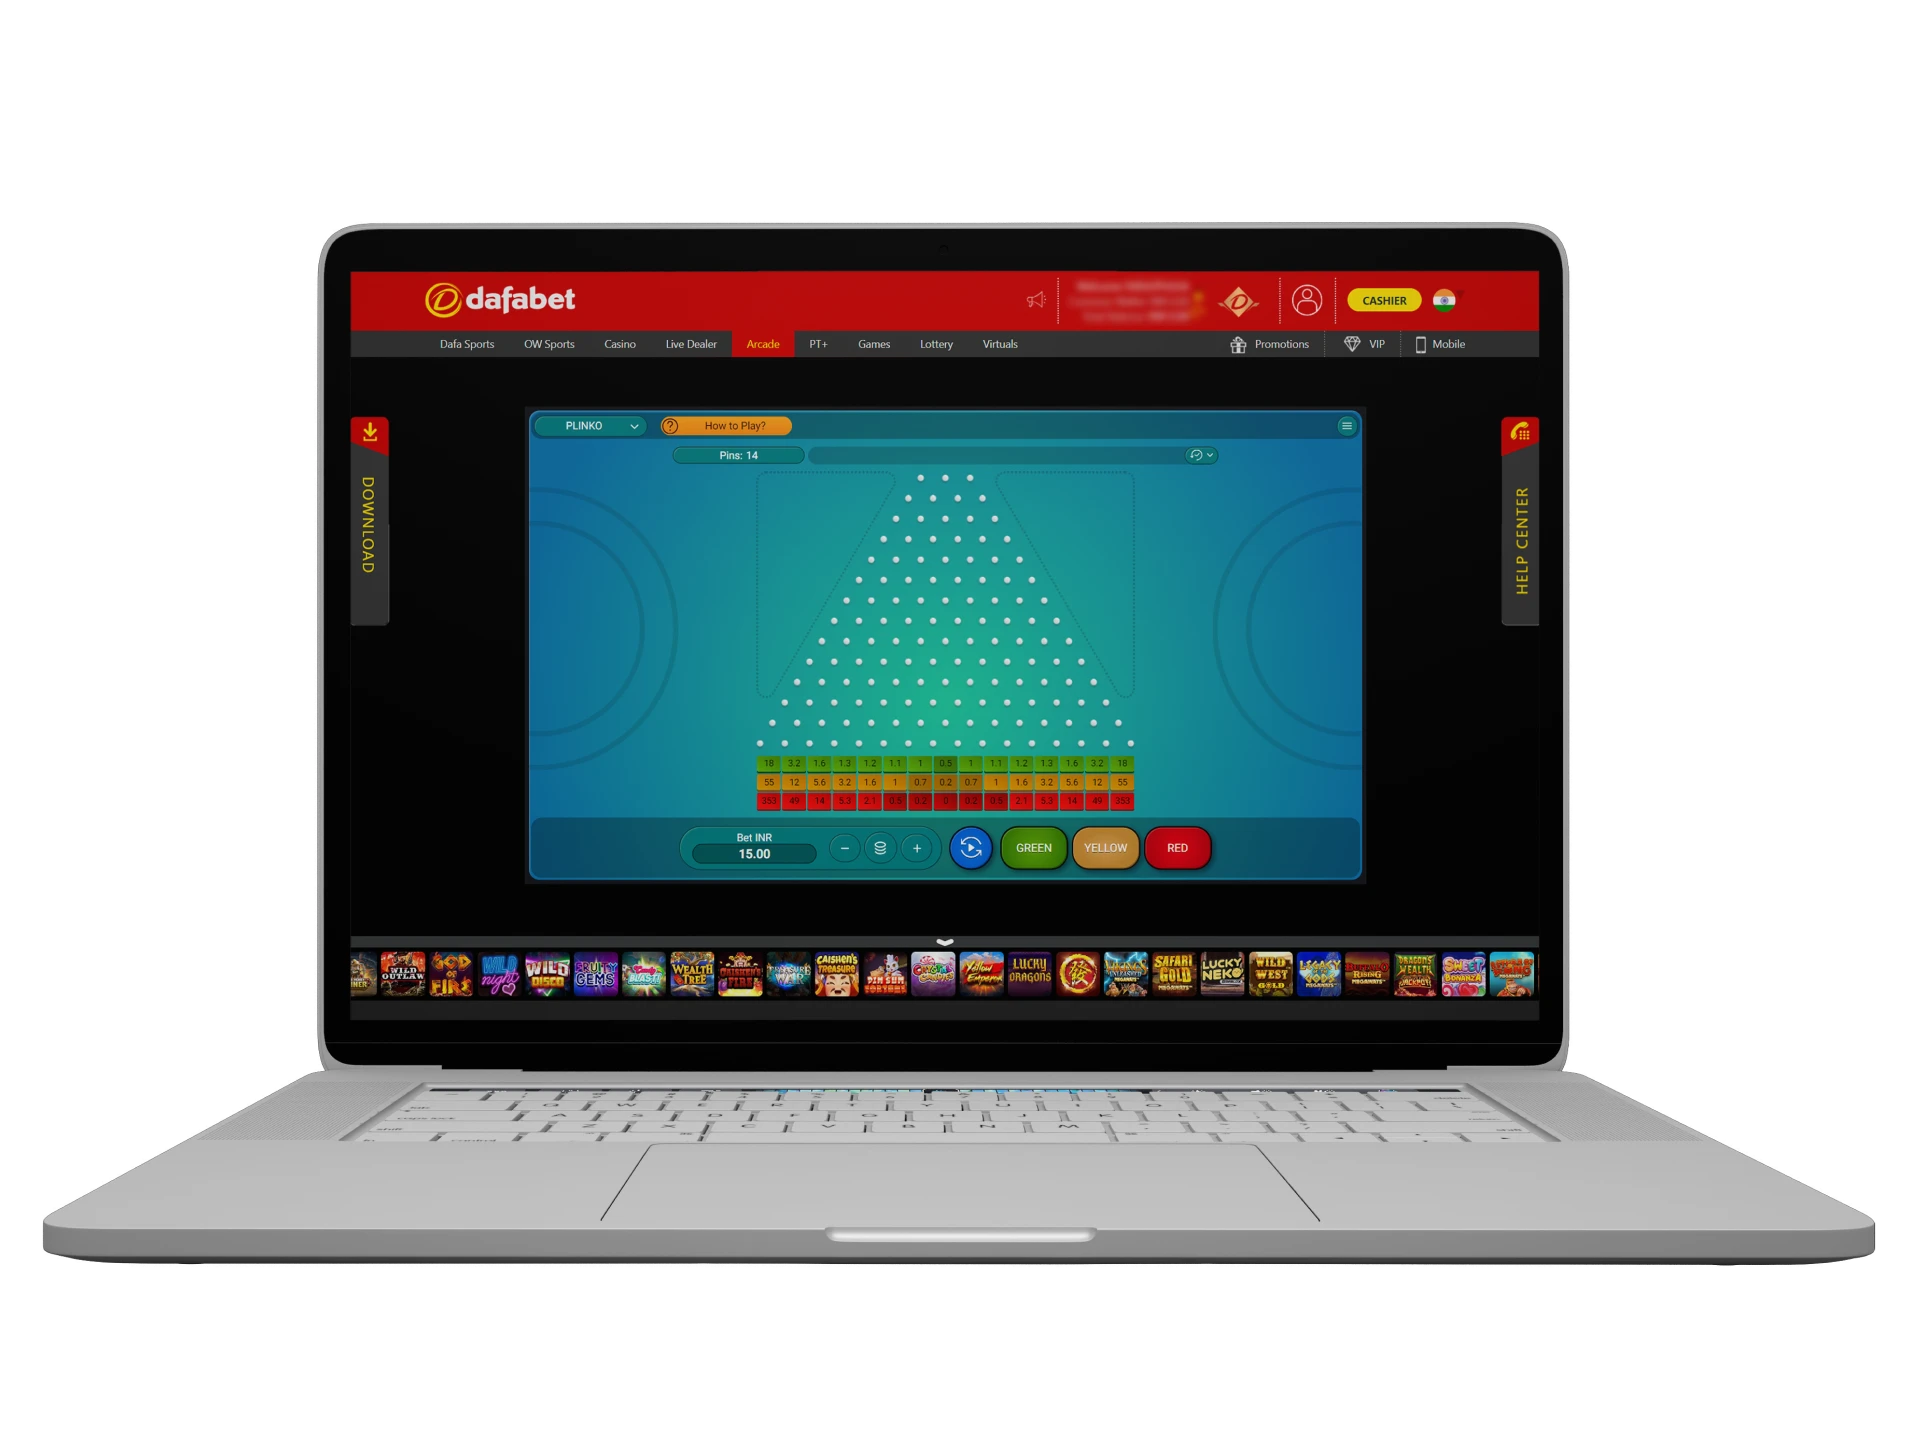 Dafabet has many different Plinko games to play, try it out.